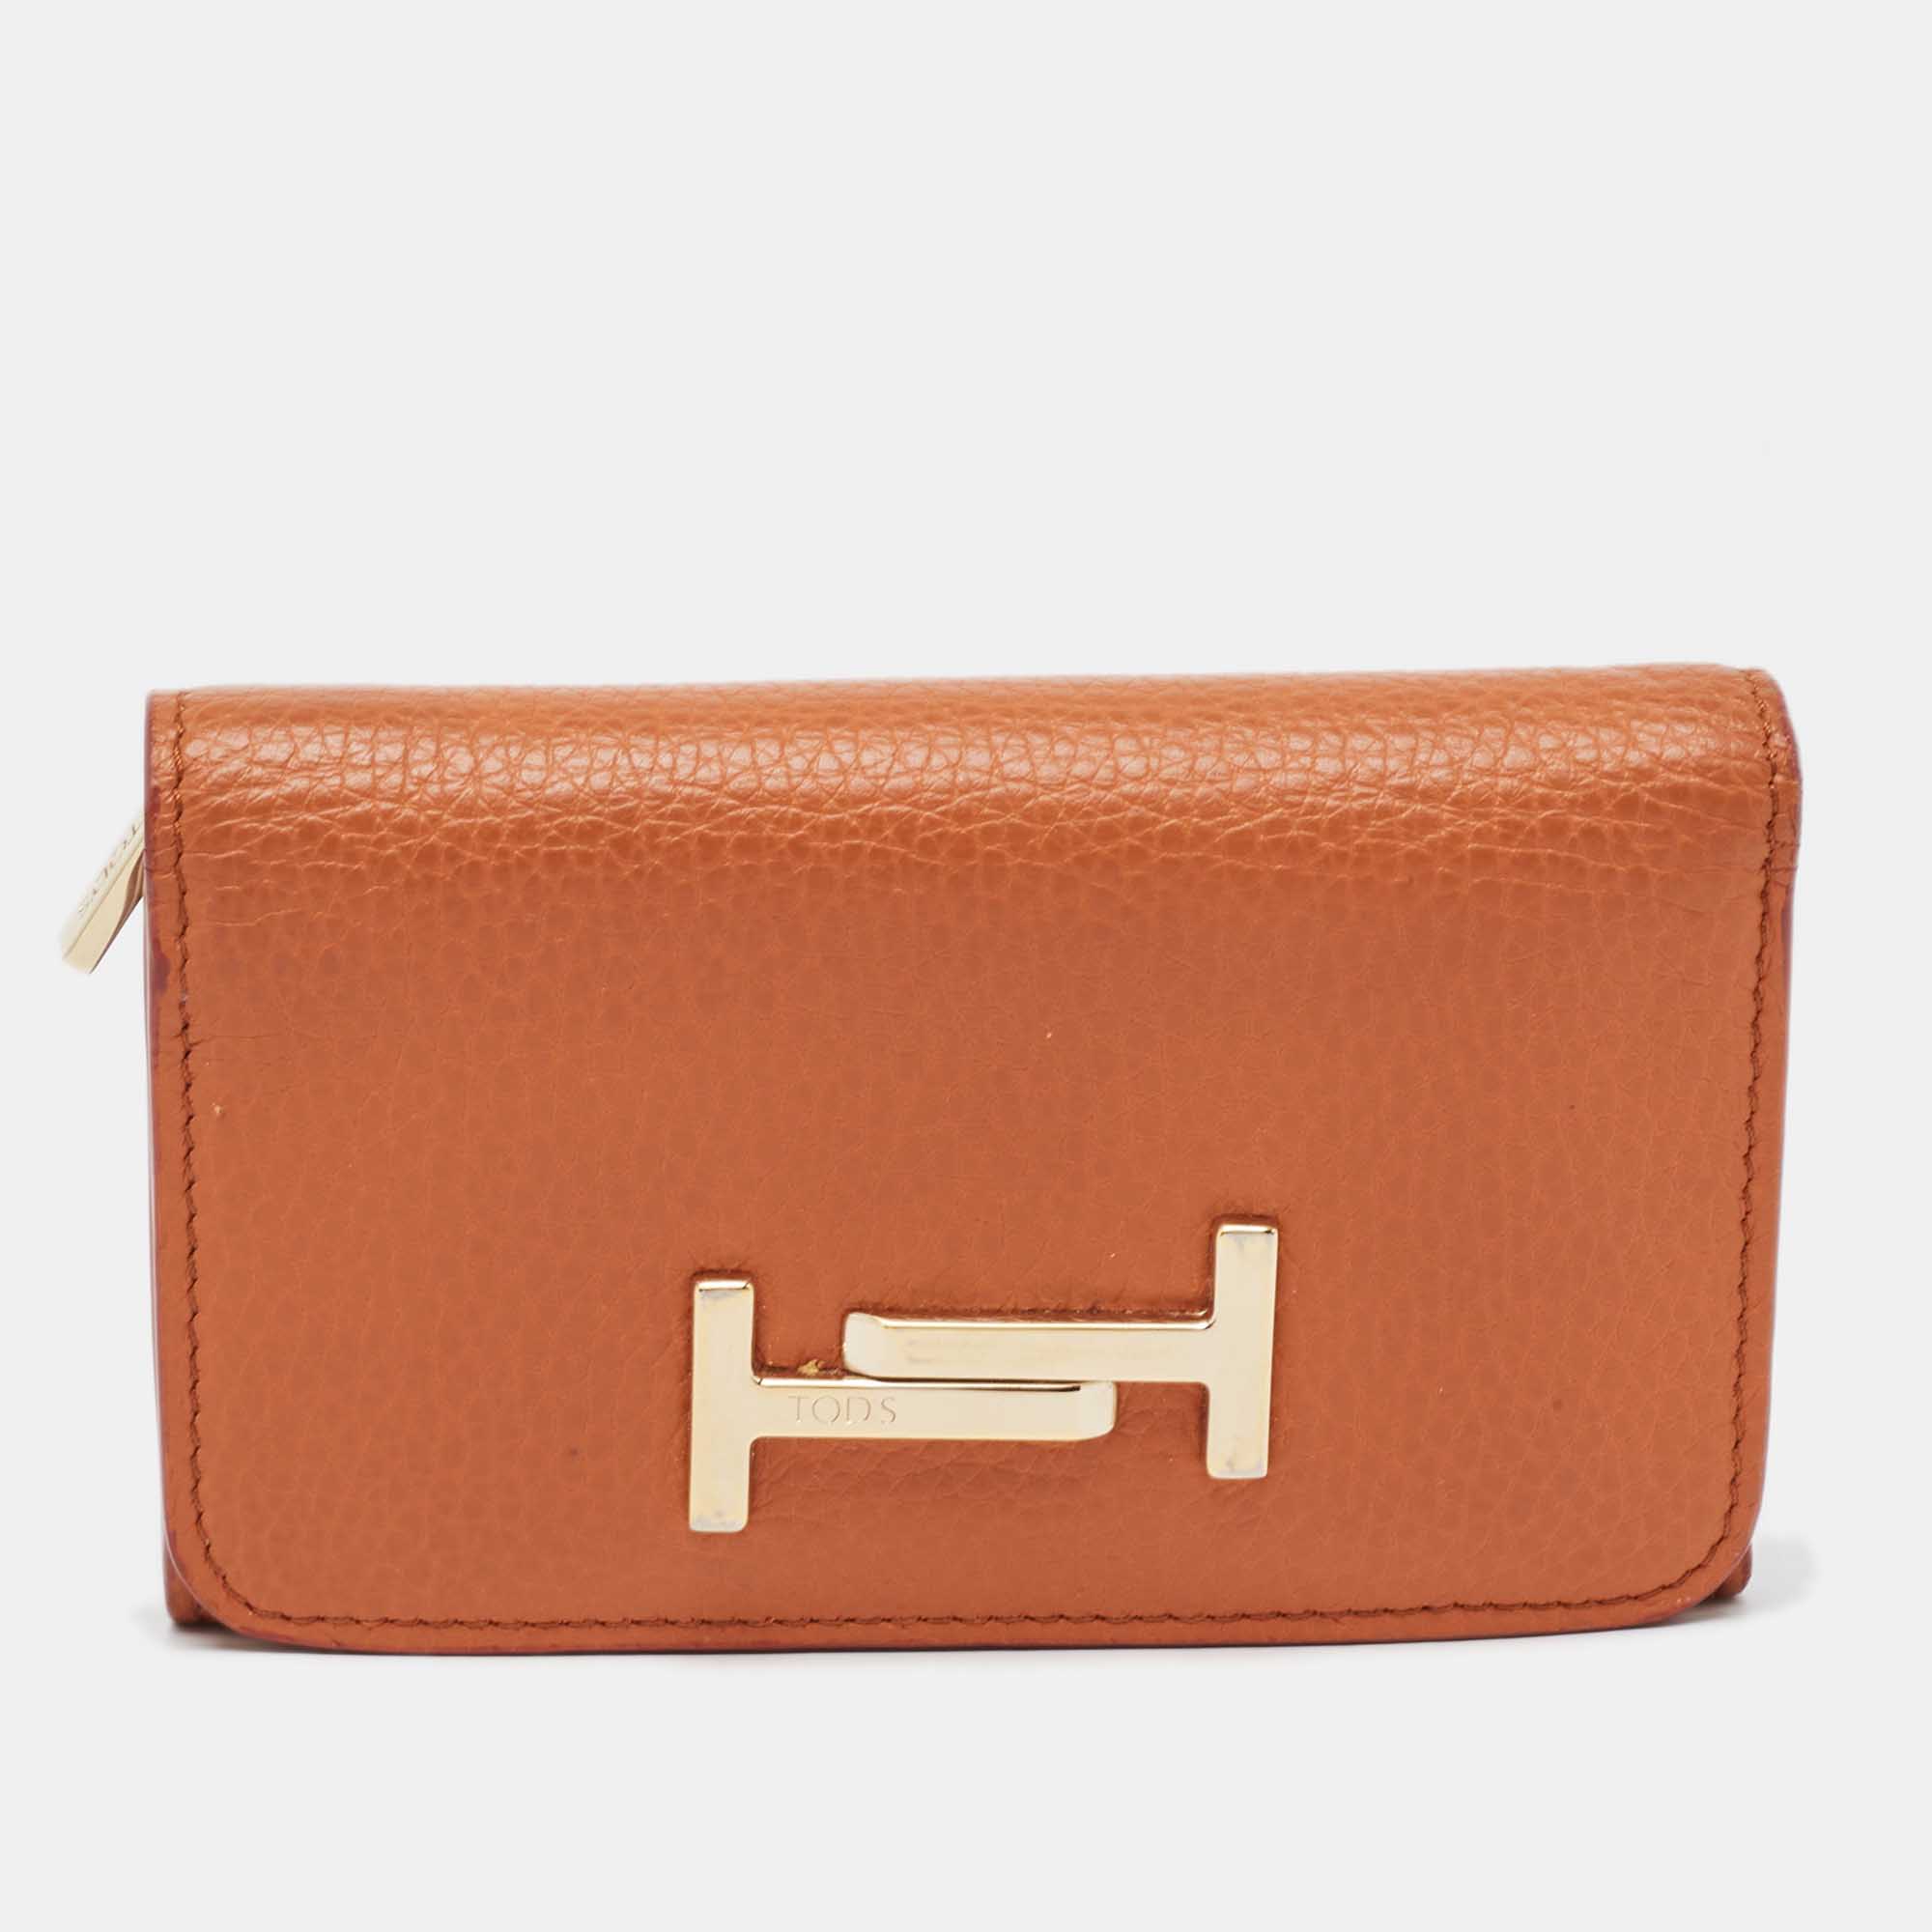 Tod's orange leather double t trifold wallet